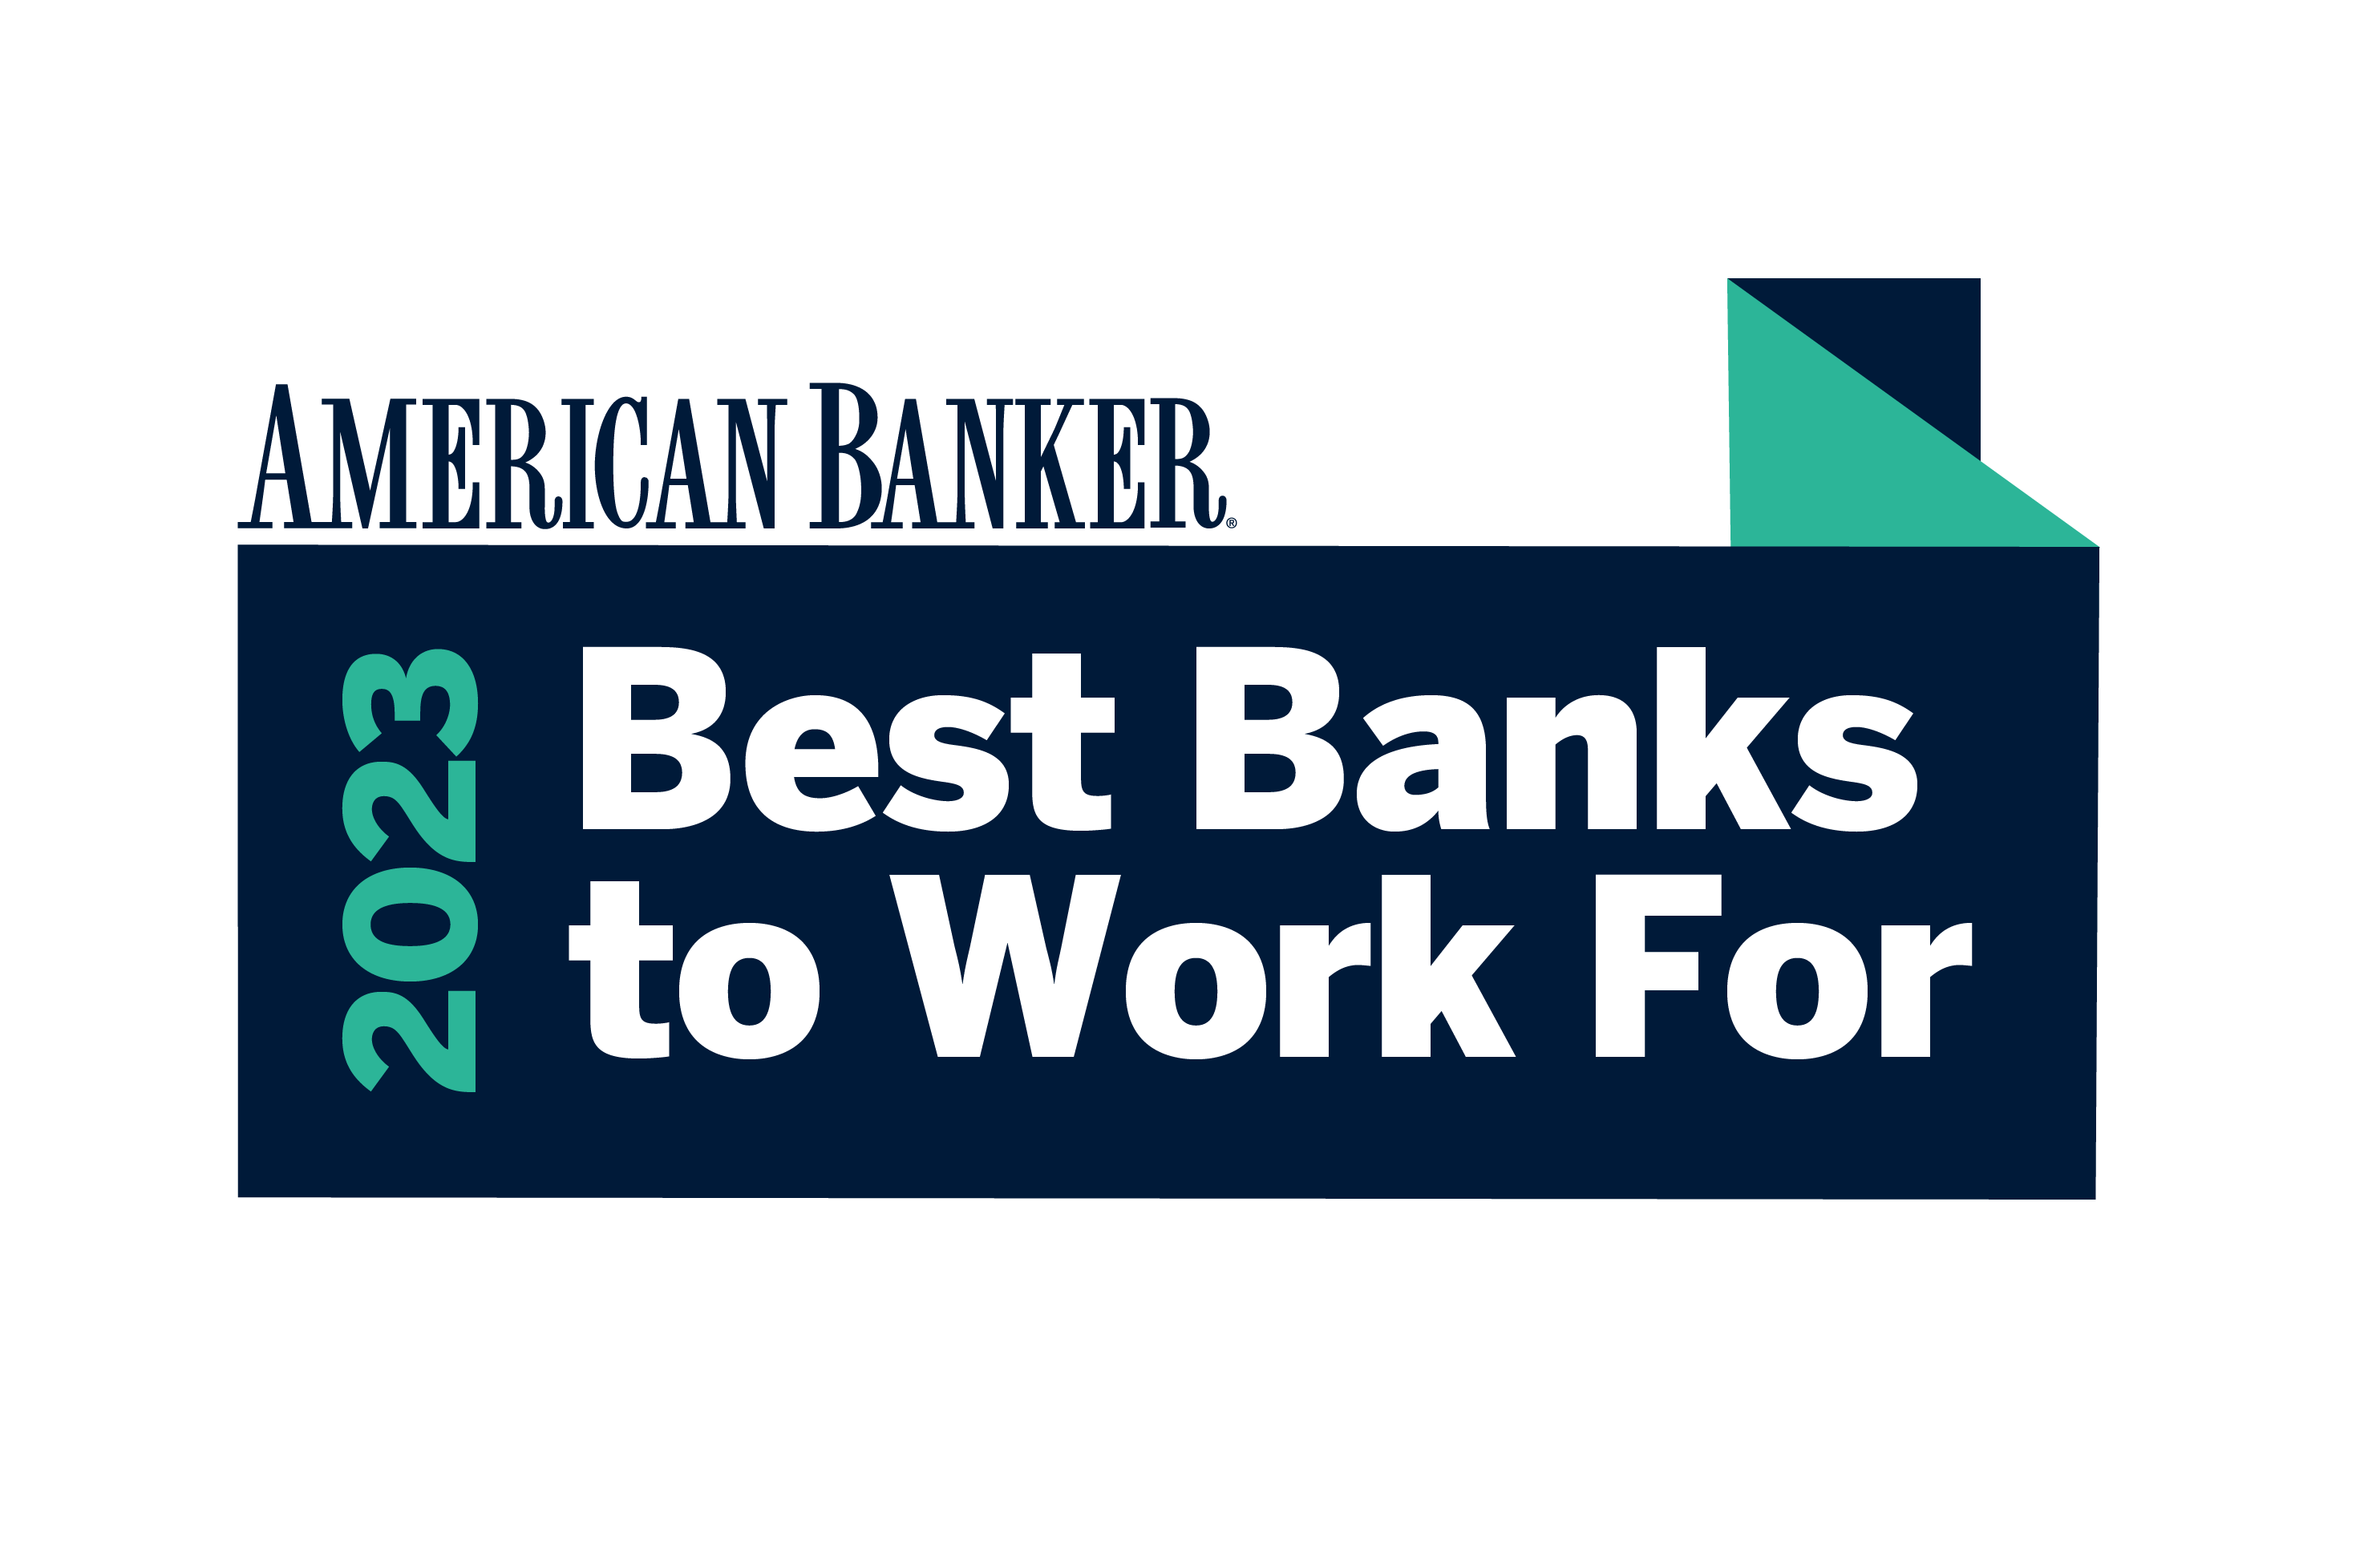 Manasquan Bank is a “Best Banks to Work For” by American Banker